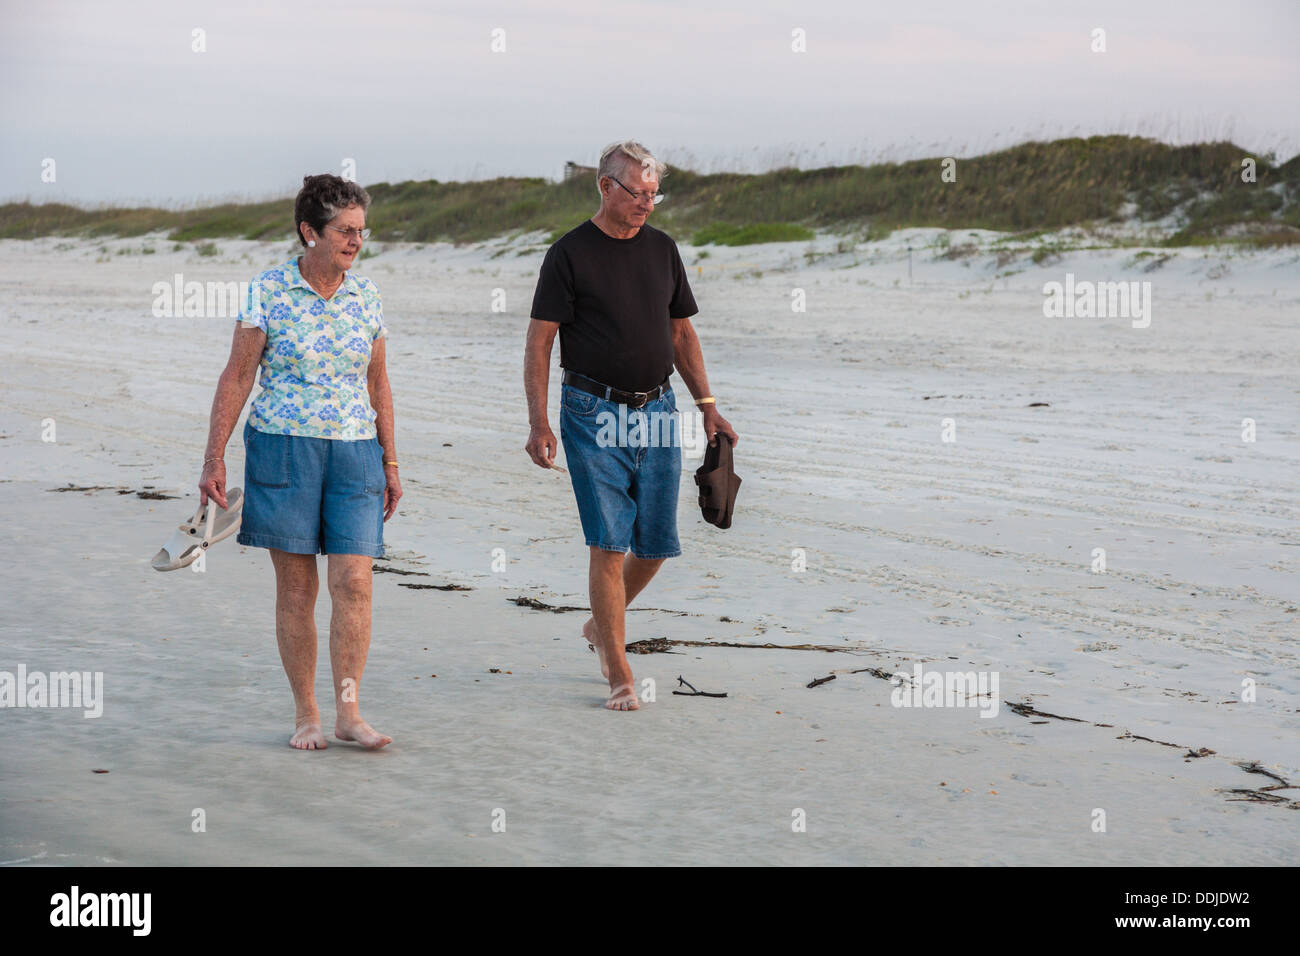 Senior man and woman carry shoes while walking and looking for shells on beach at Daytona Beach, Florida Stock Photo